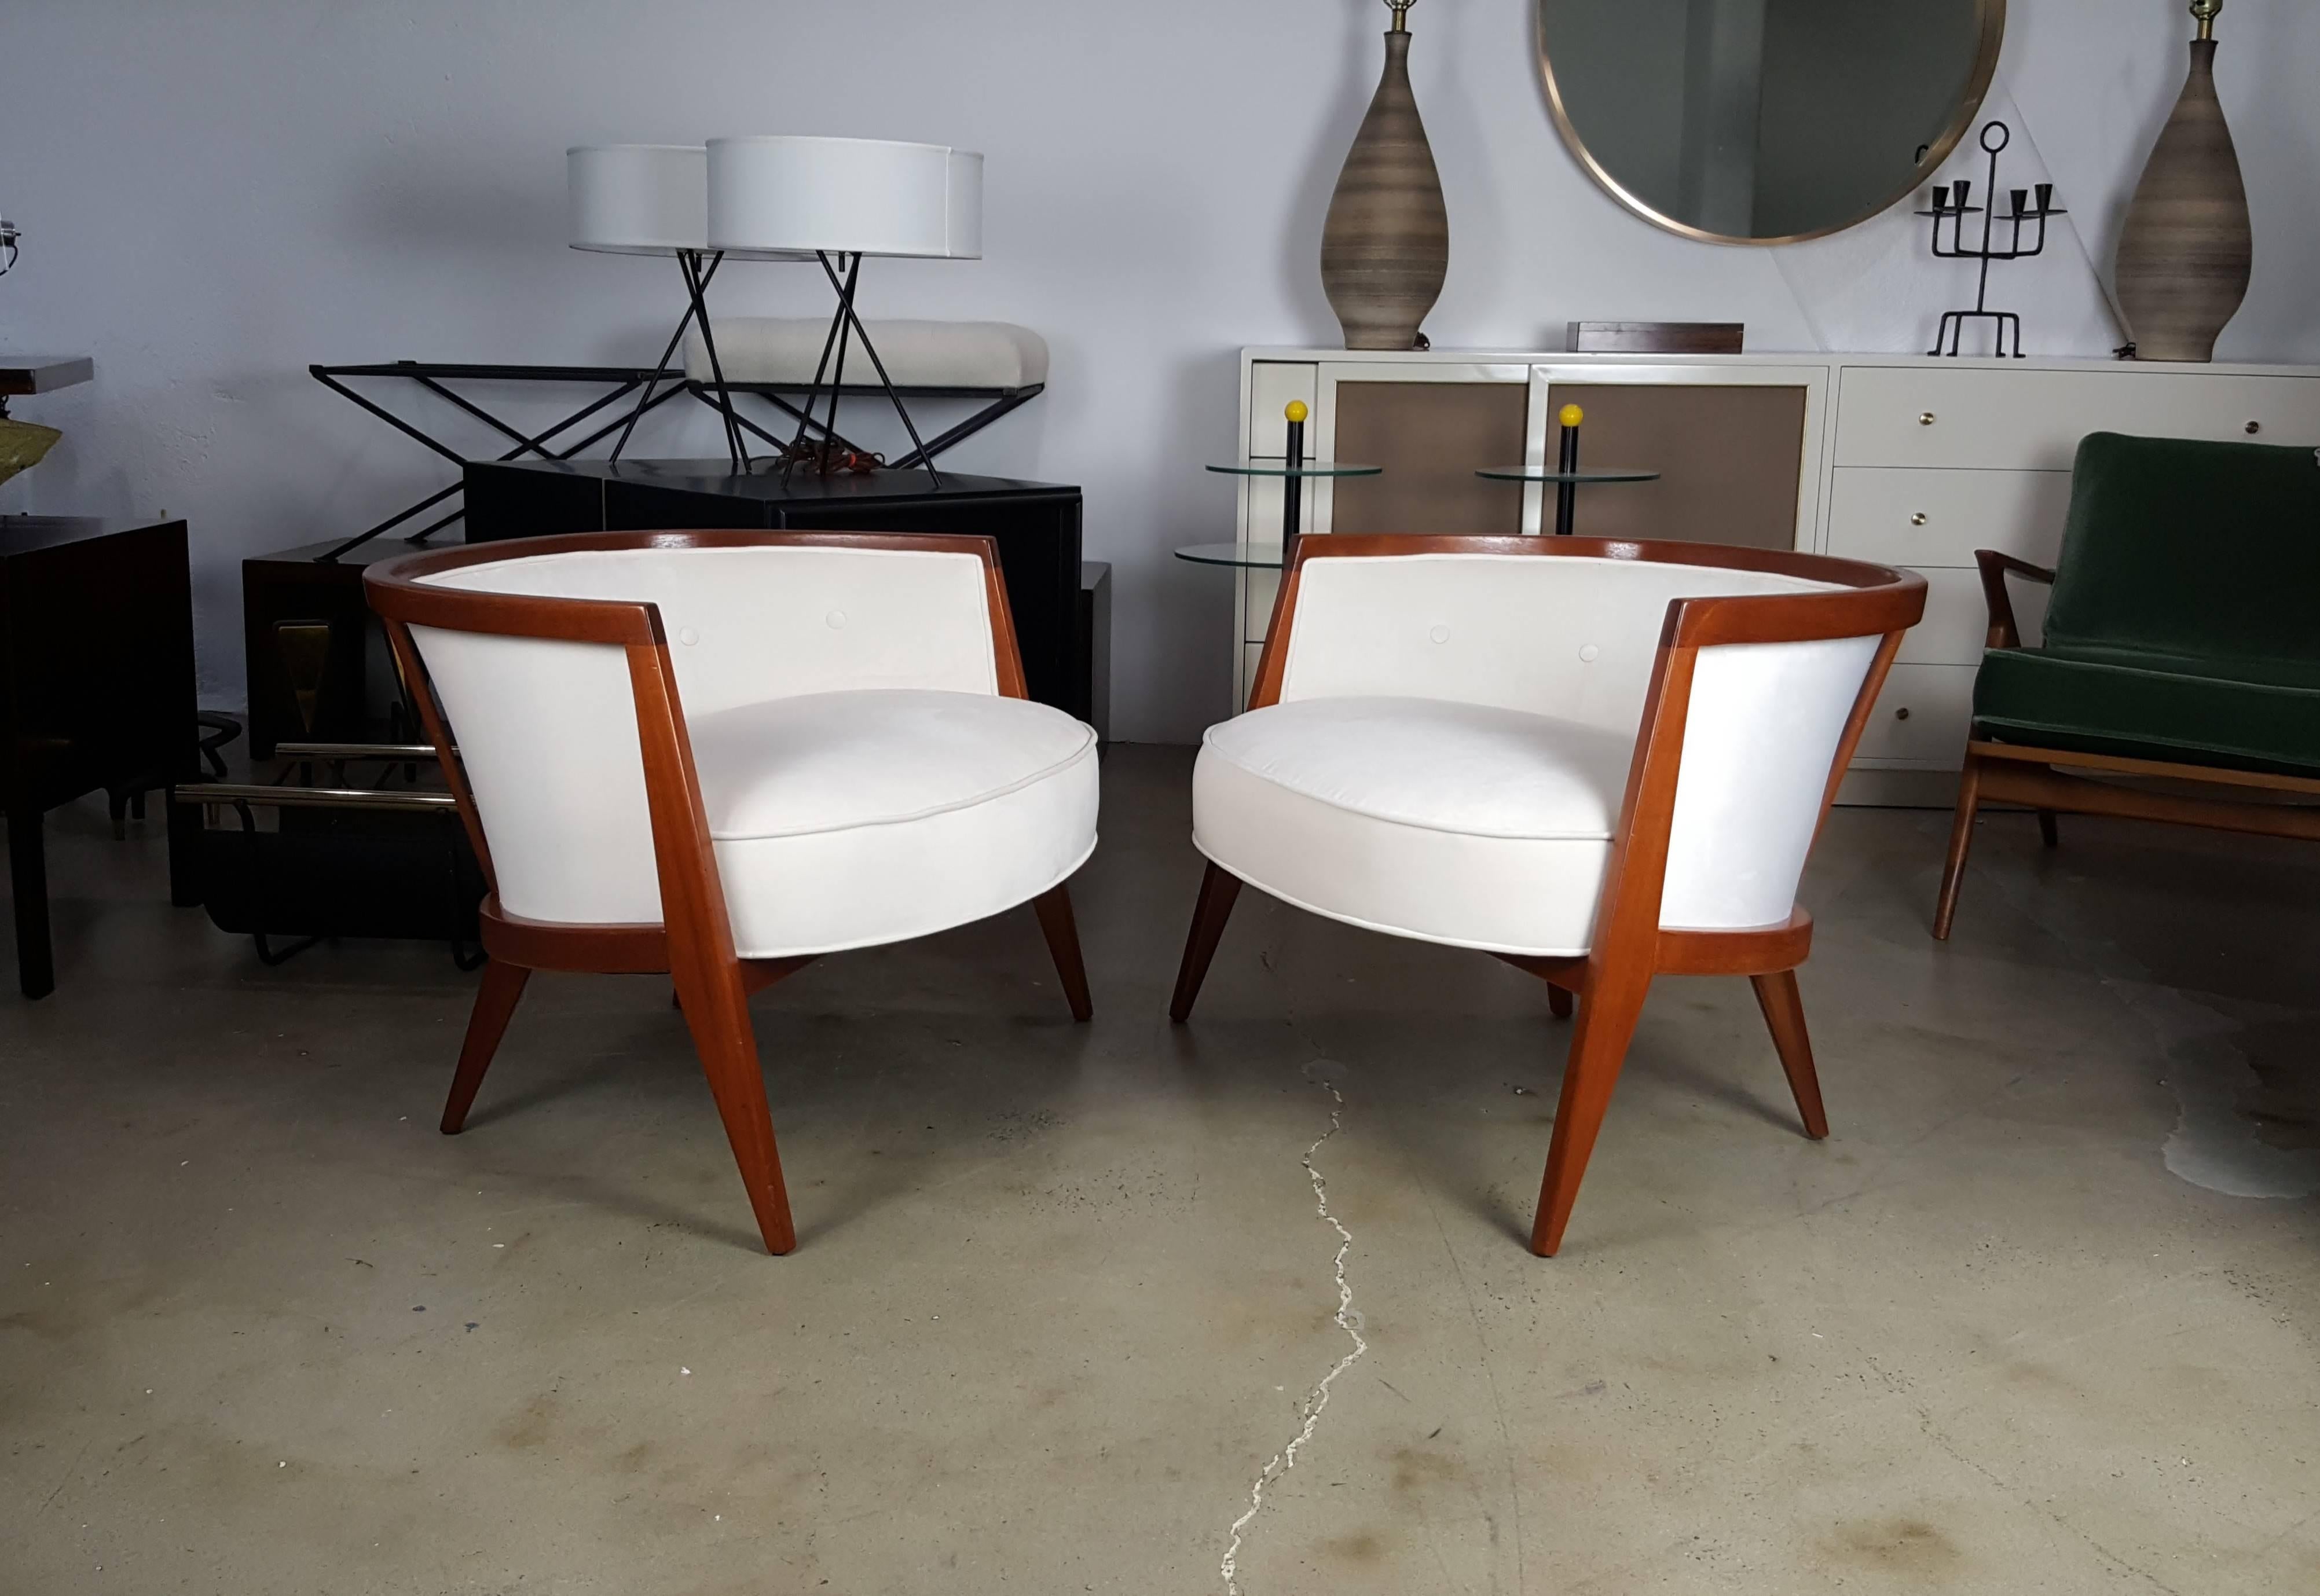 Sculptural mahogany lounge chairs by Harvey Probber, 1960s. Exceptional design. Low, wide and comfortable. These chairs have been fully restored in an ebonized finish with textured white velvet.

See this item in our private NYC showroom! Refine